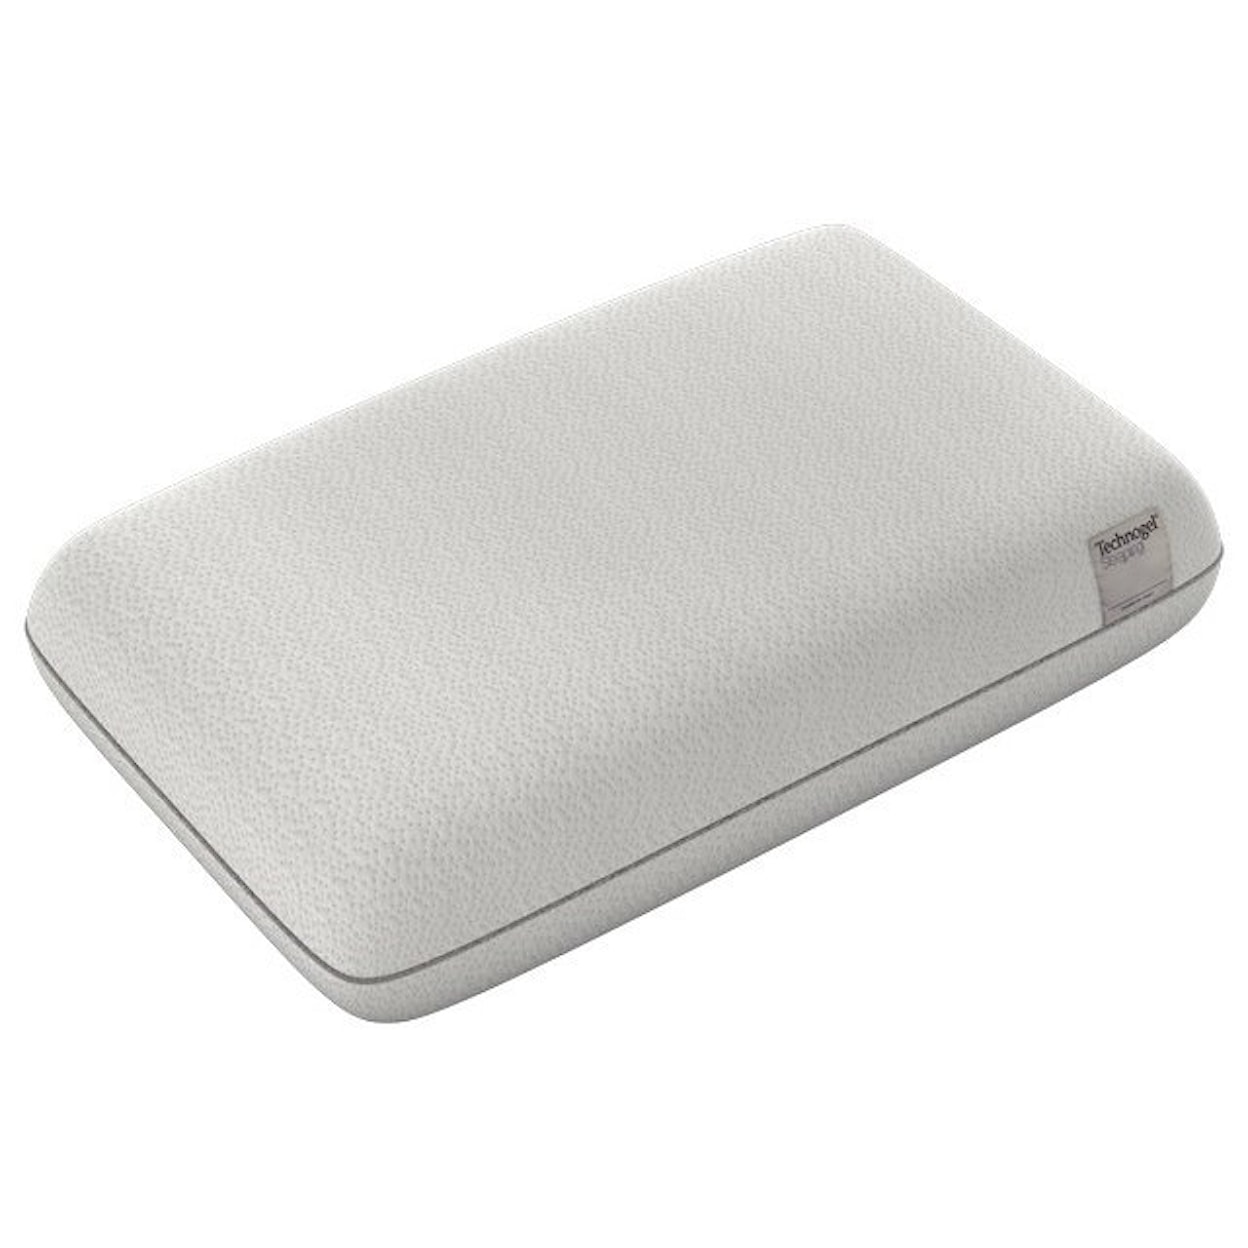 Technogel Deluxe Thick Pillow Deluxe Thick Standard Sized Pillow